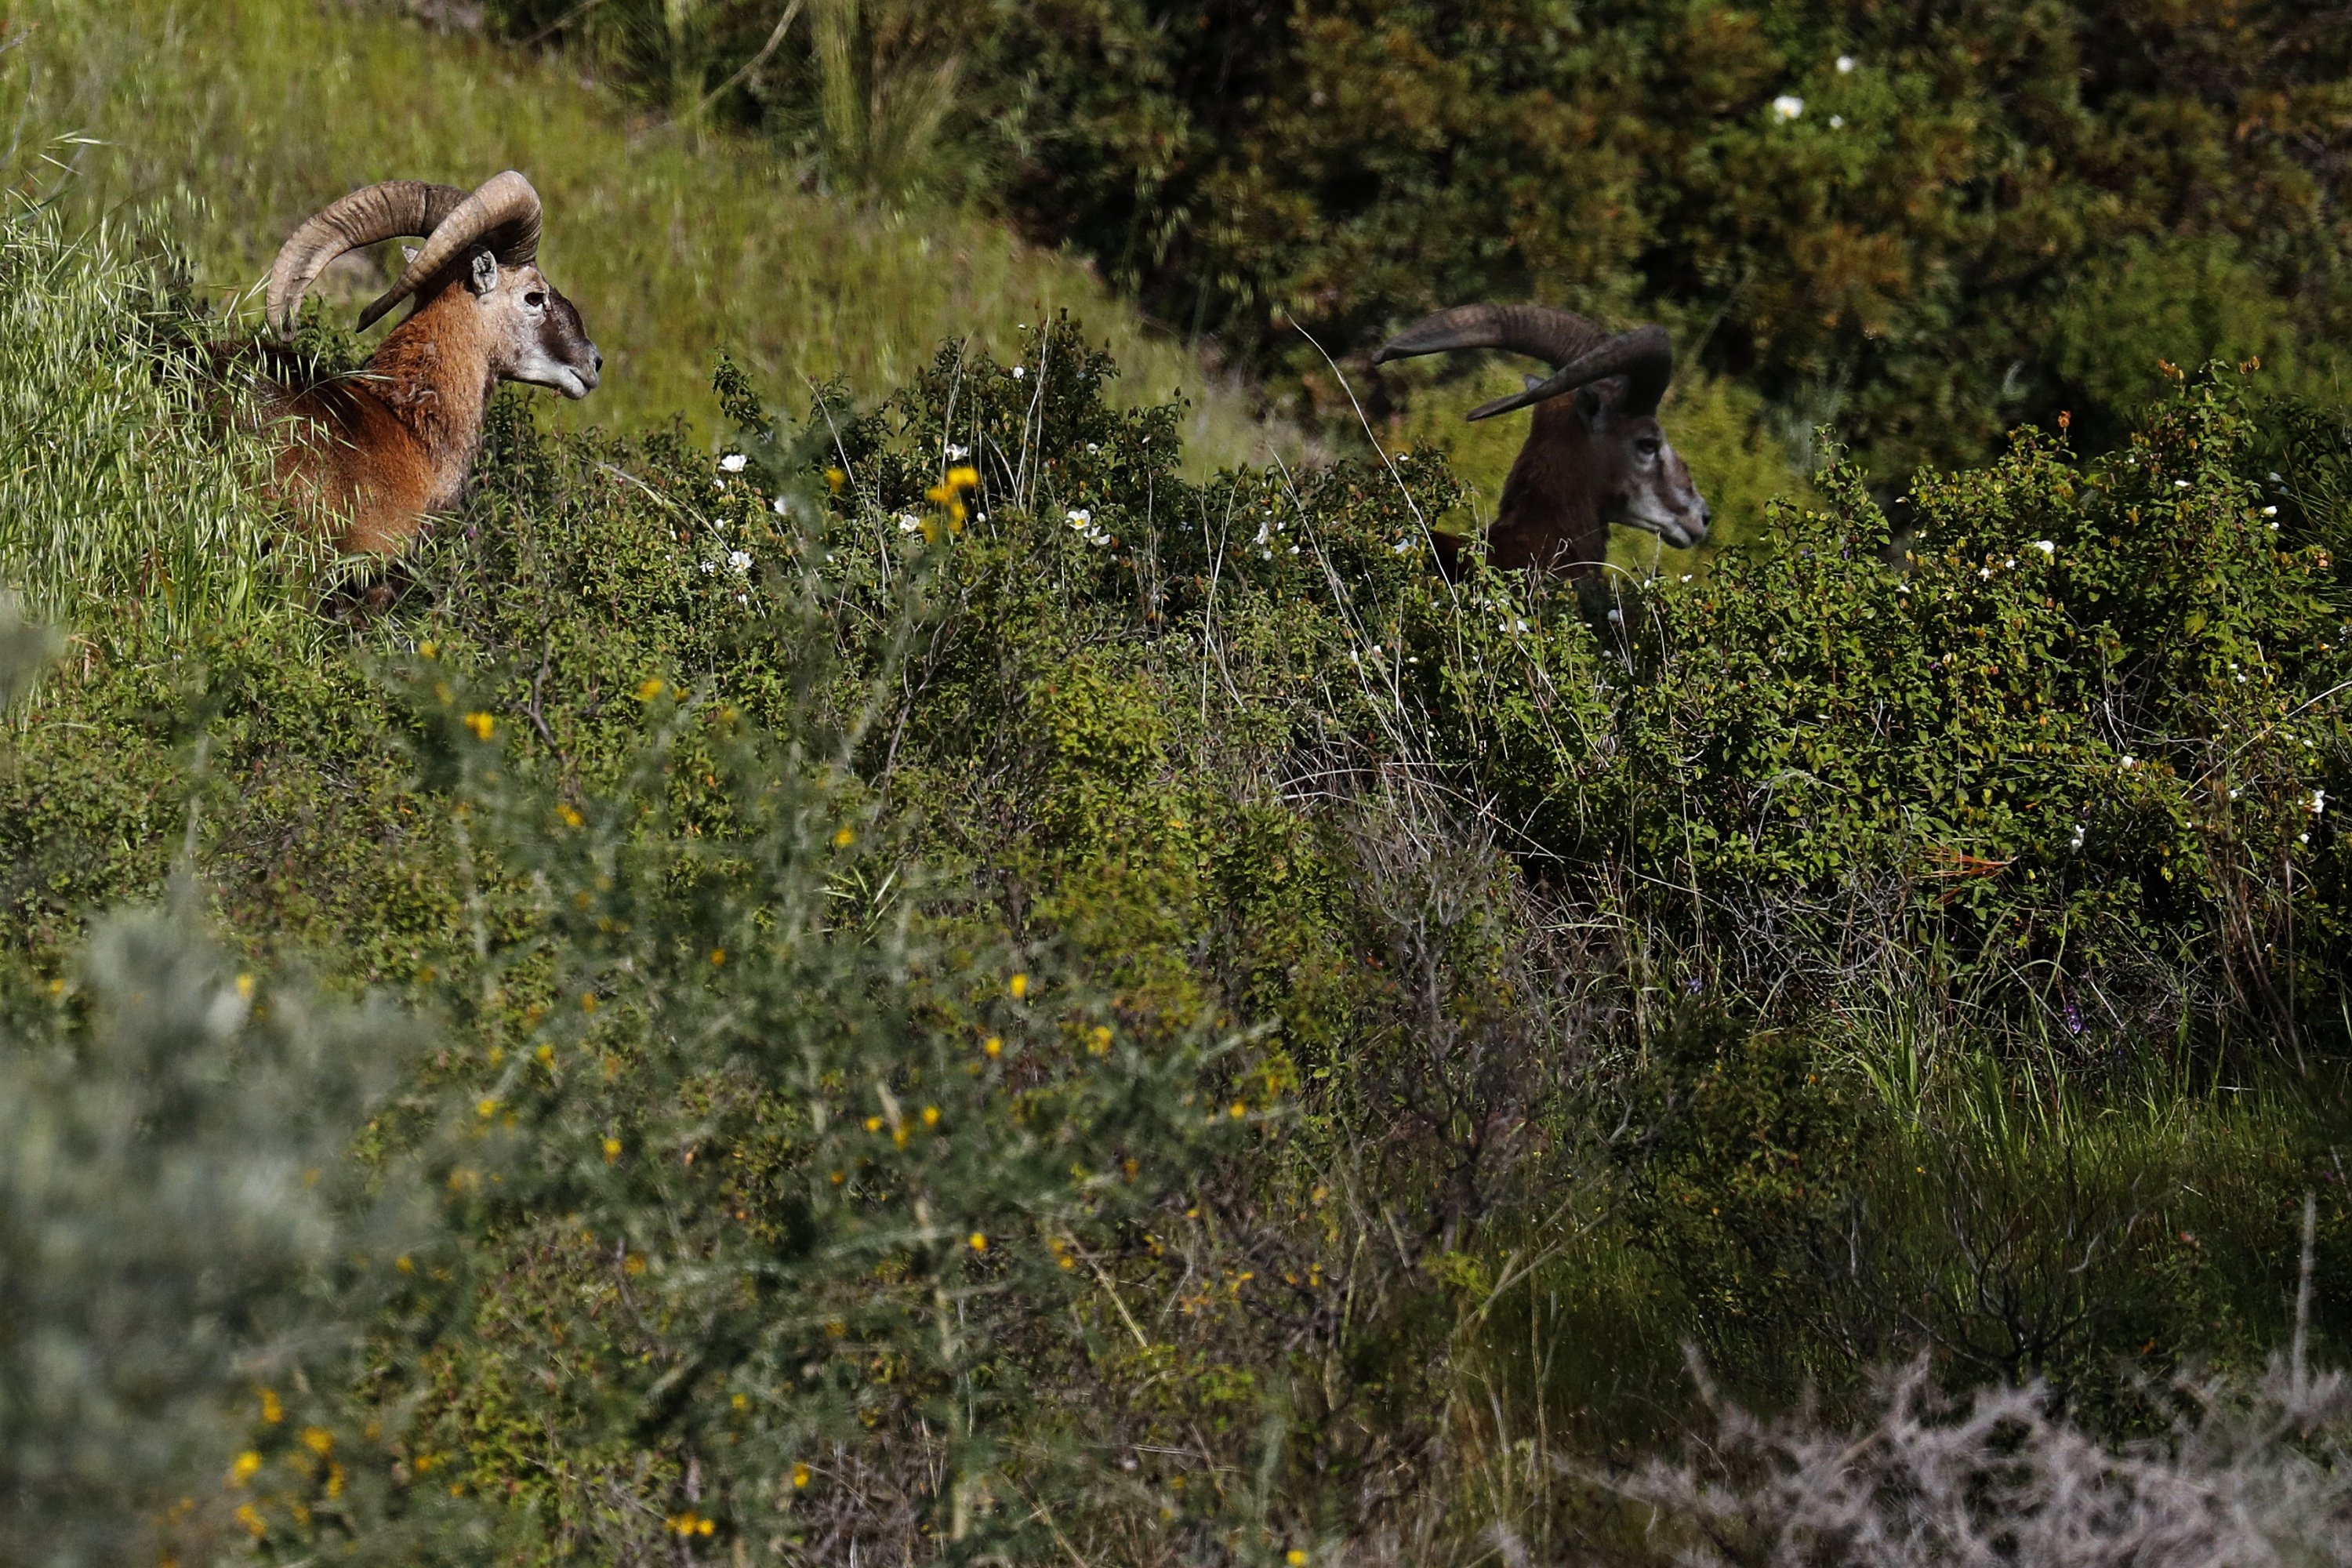 Two endangered Mouflon sheep are seen in the forest near the abandoned village of Varisia, inside the U.N.-controlled buffer zone that divides the Greek-controlled south and the Turkish-controlled north, on the island of Cyprus, March 26, 2021. (AP Photo)